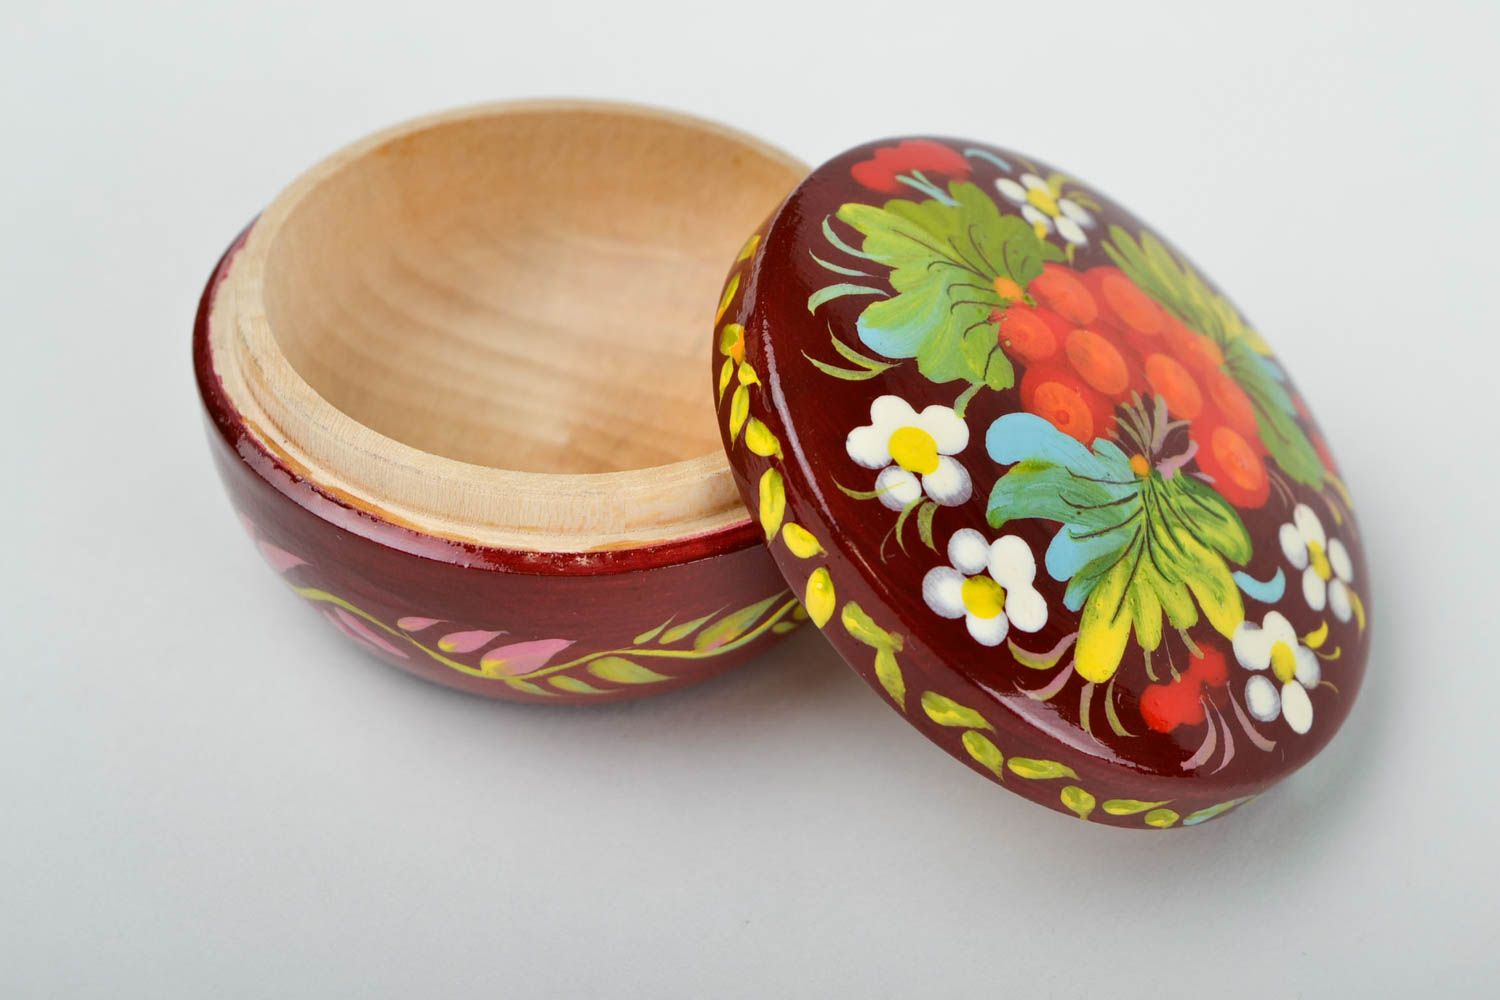 Handmade wooden box for jewelry designer box for accessories gift ideas photo 5